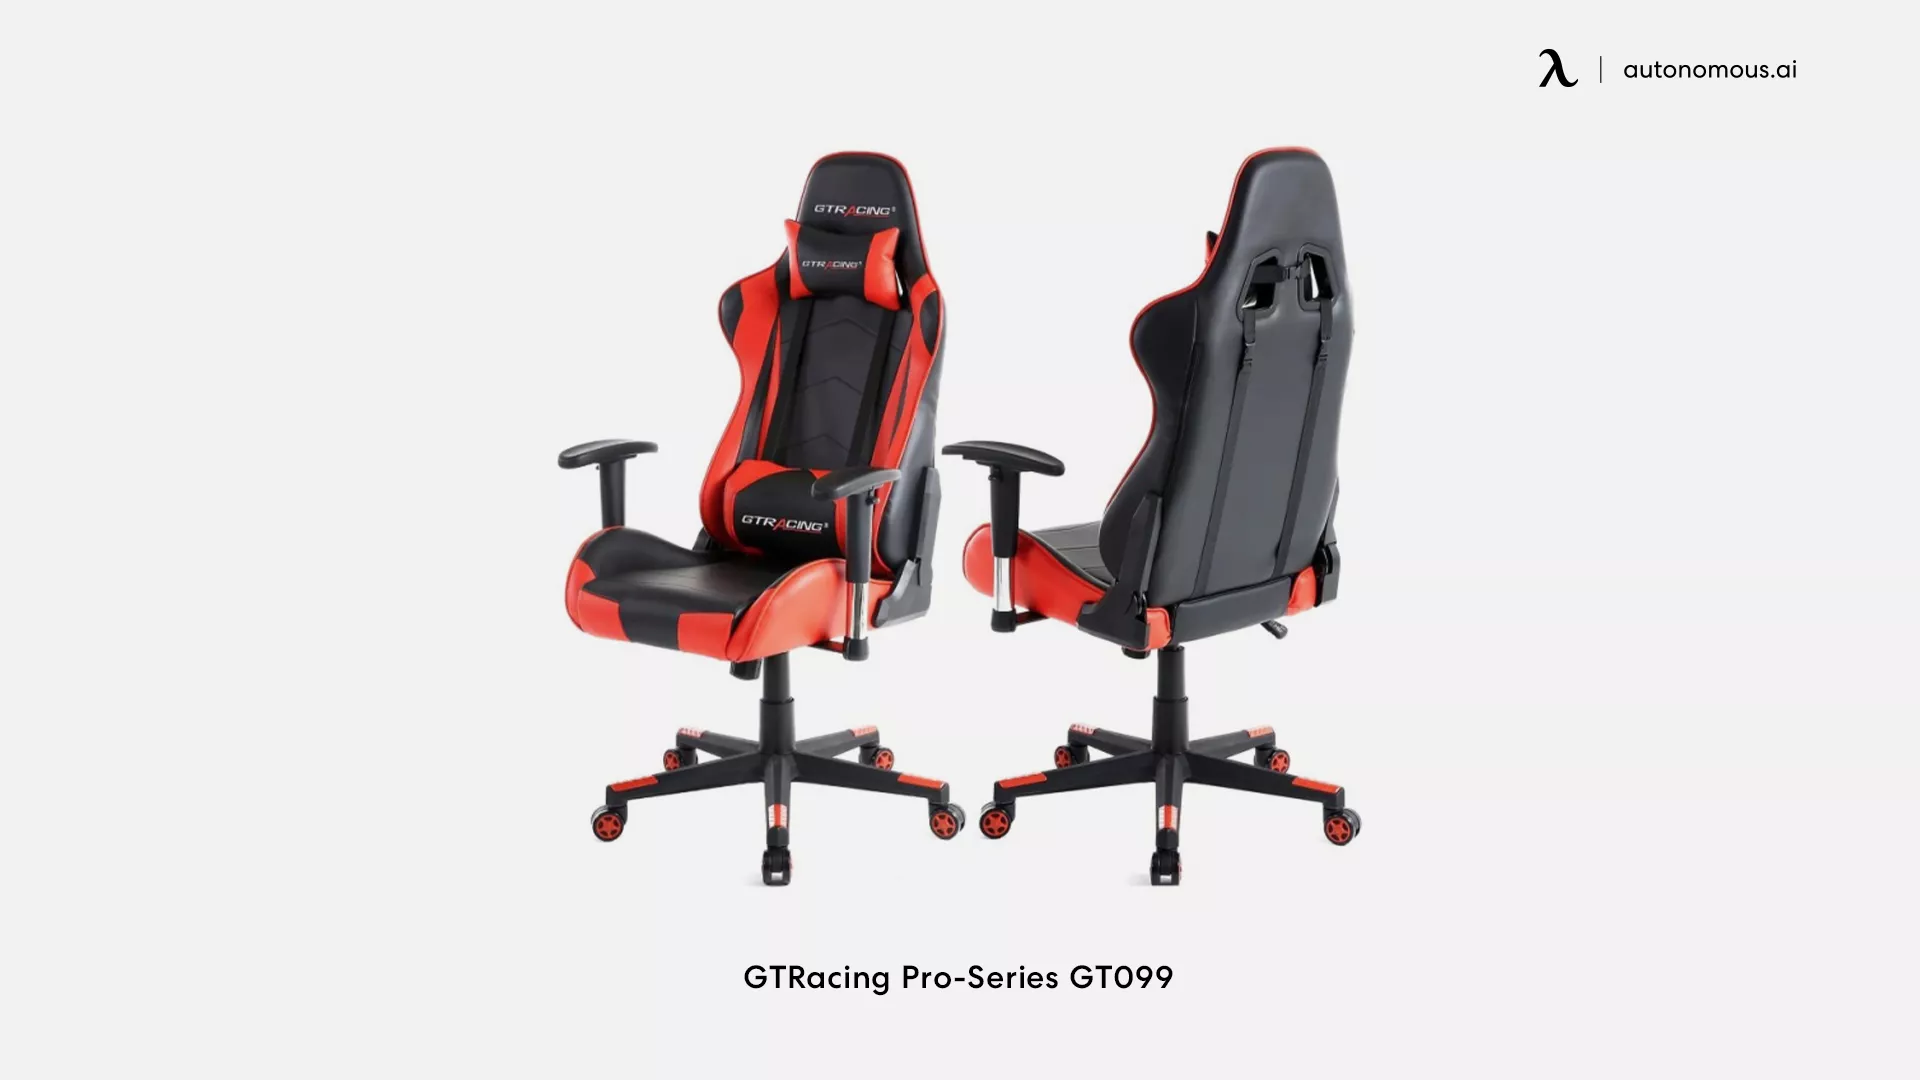 GTRacing Pro-Series GT099 red gaming chair